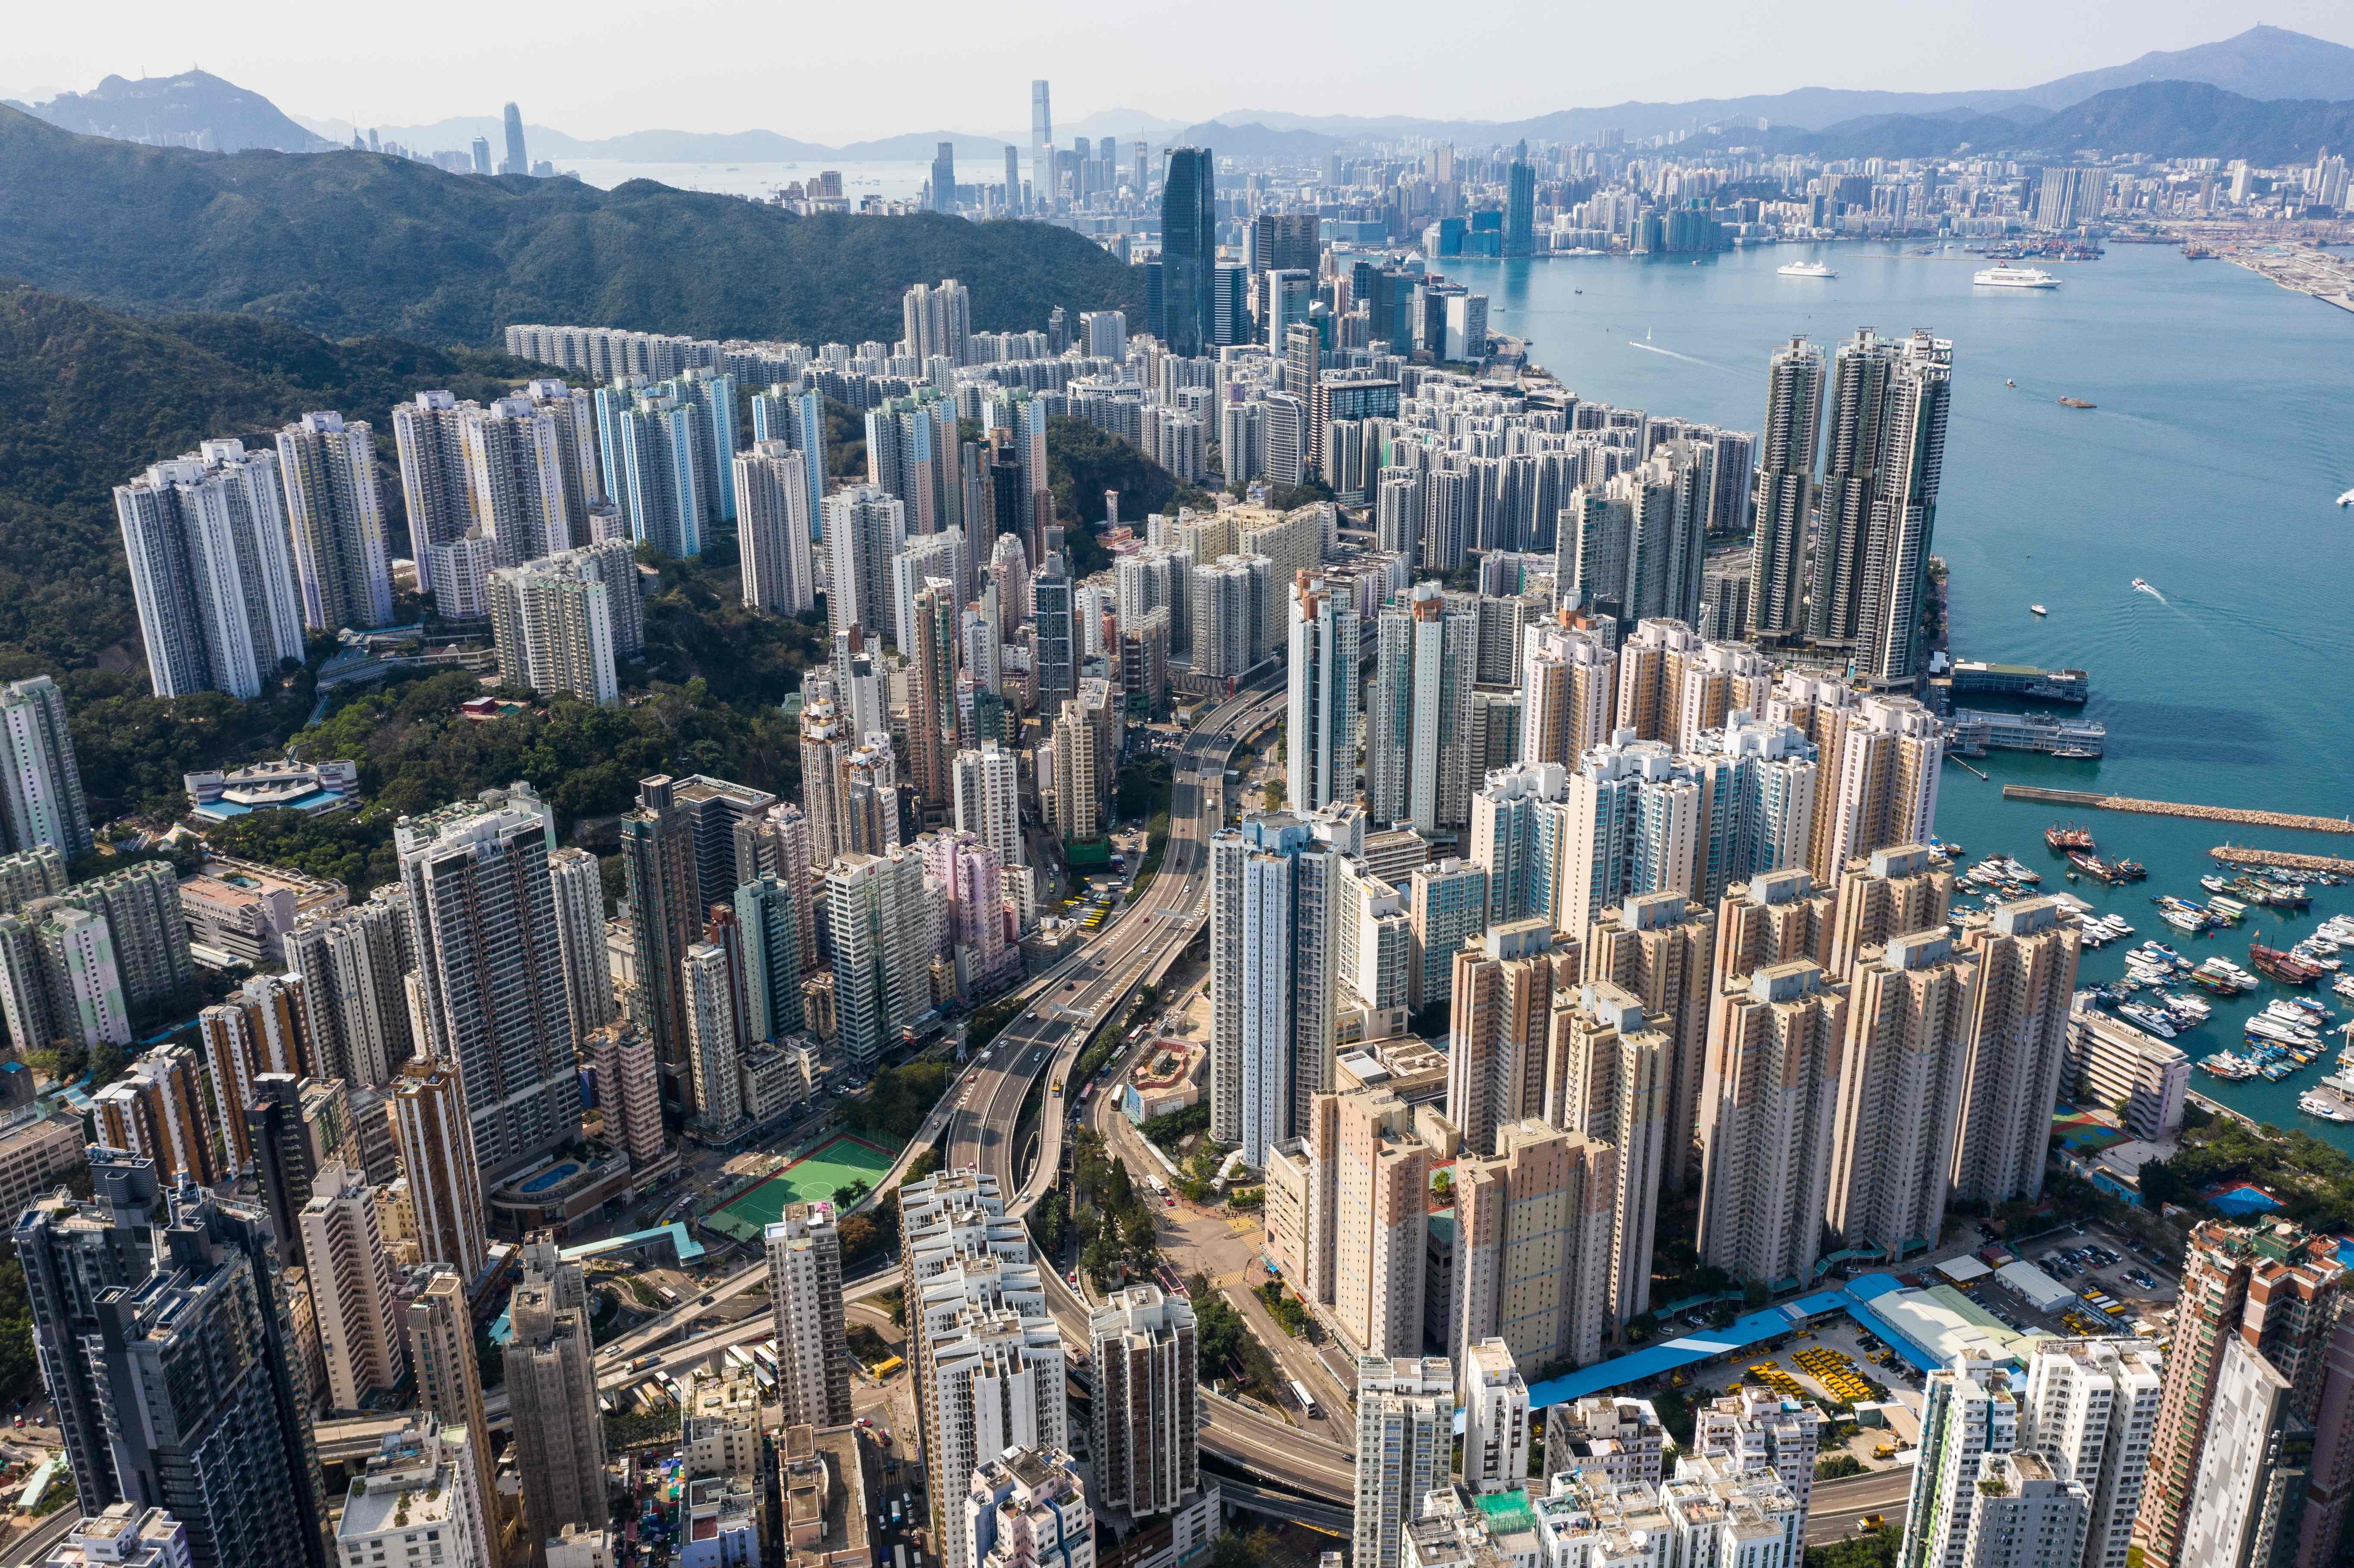 Hong Kong has been reeling from the impact of the Covid-19 epidemic, with tax breaks and cash handouts among a relief package rolled out by the government. Photo: AFP